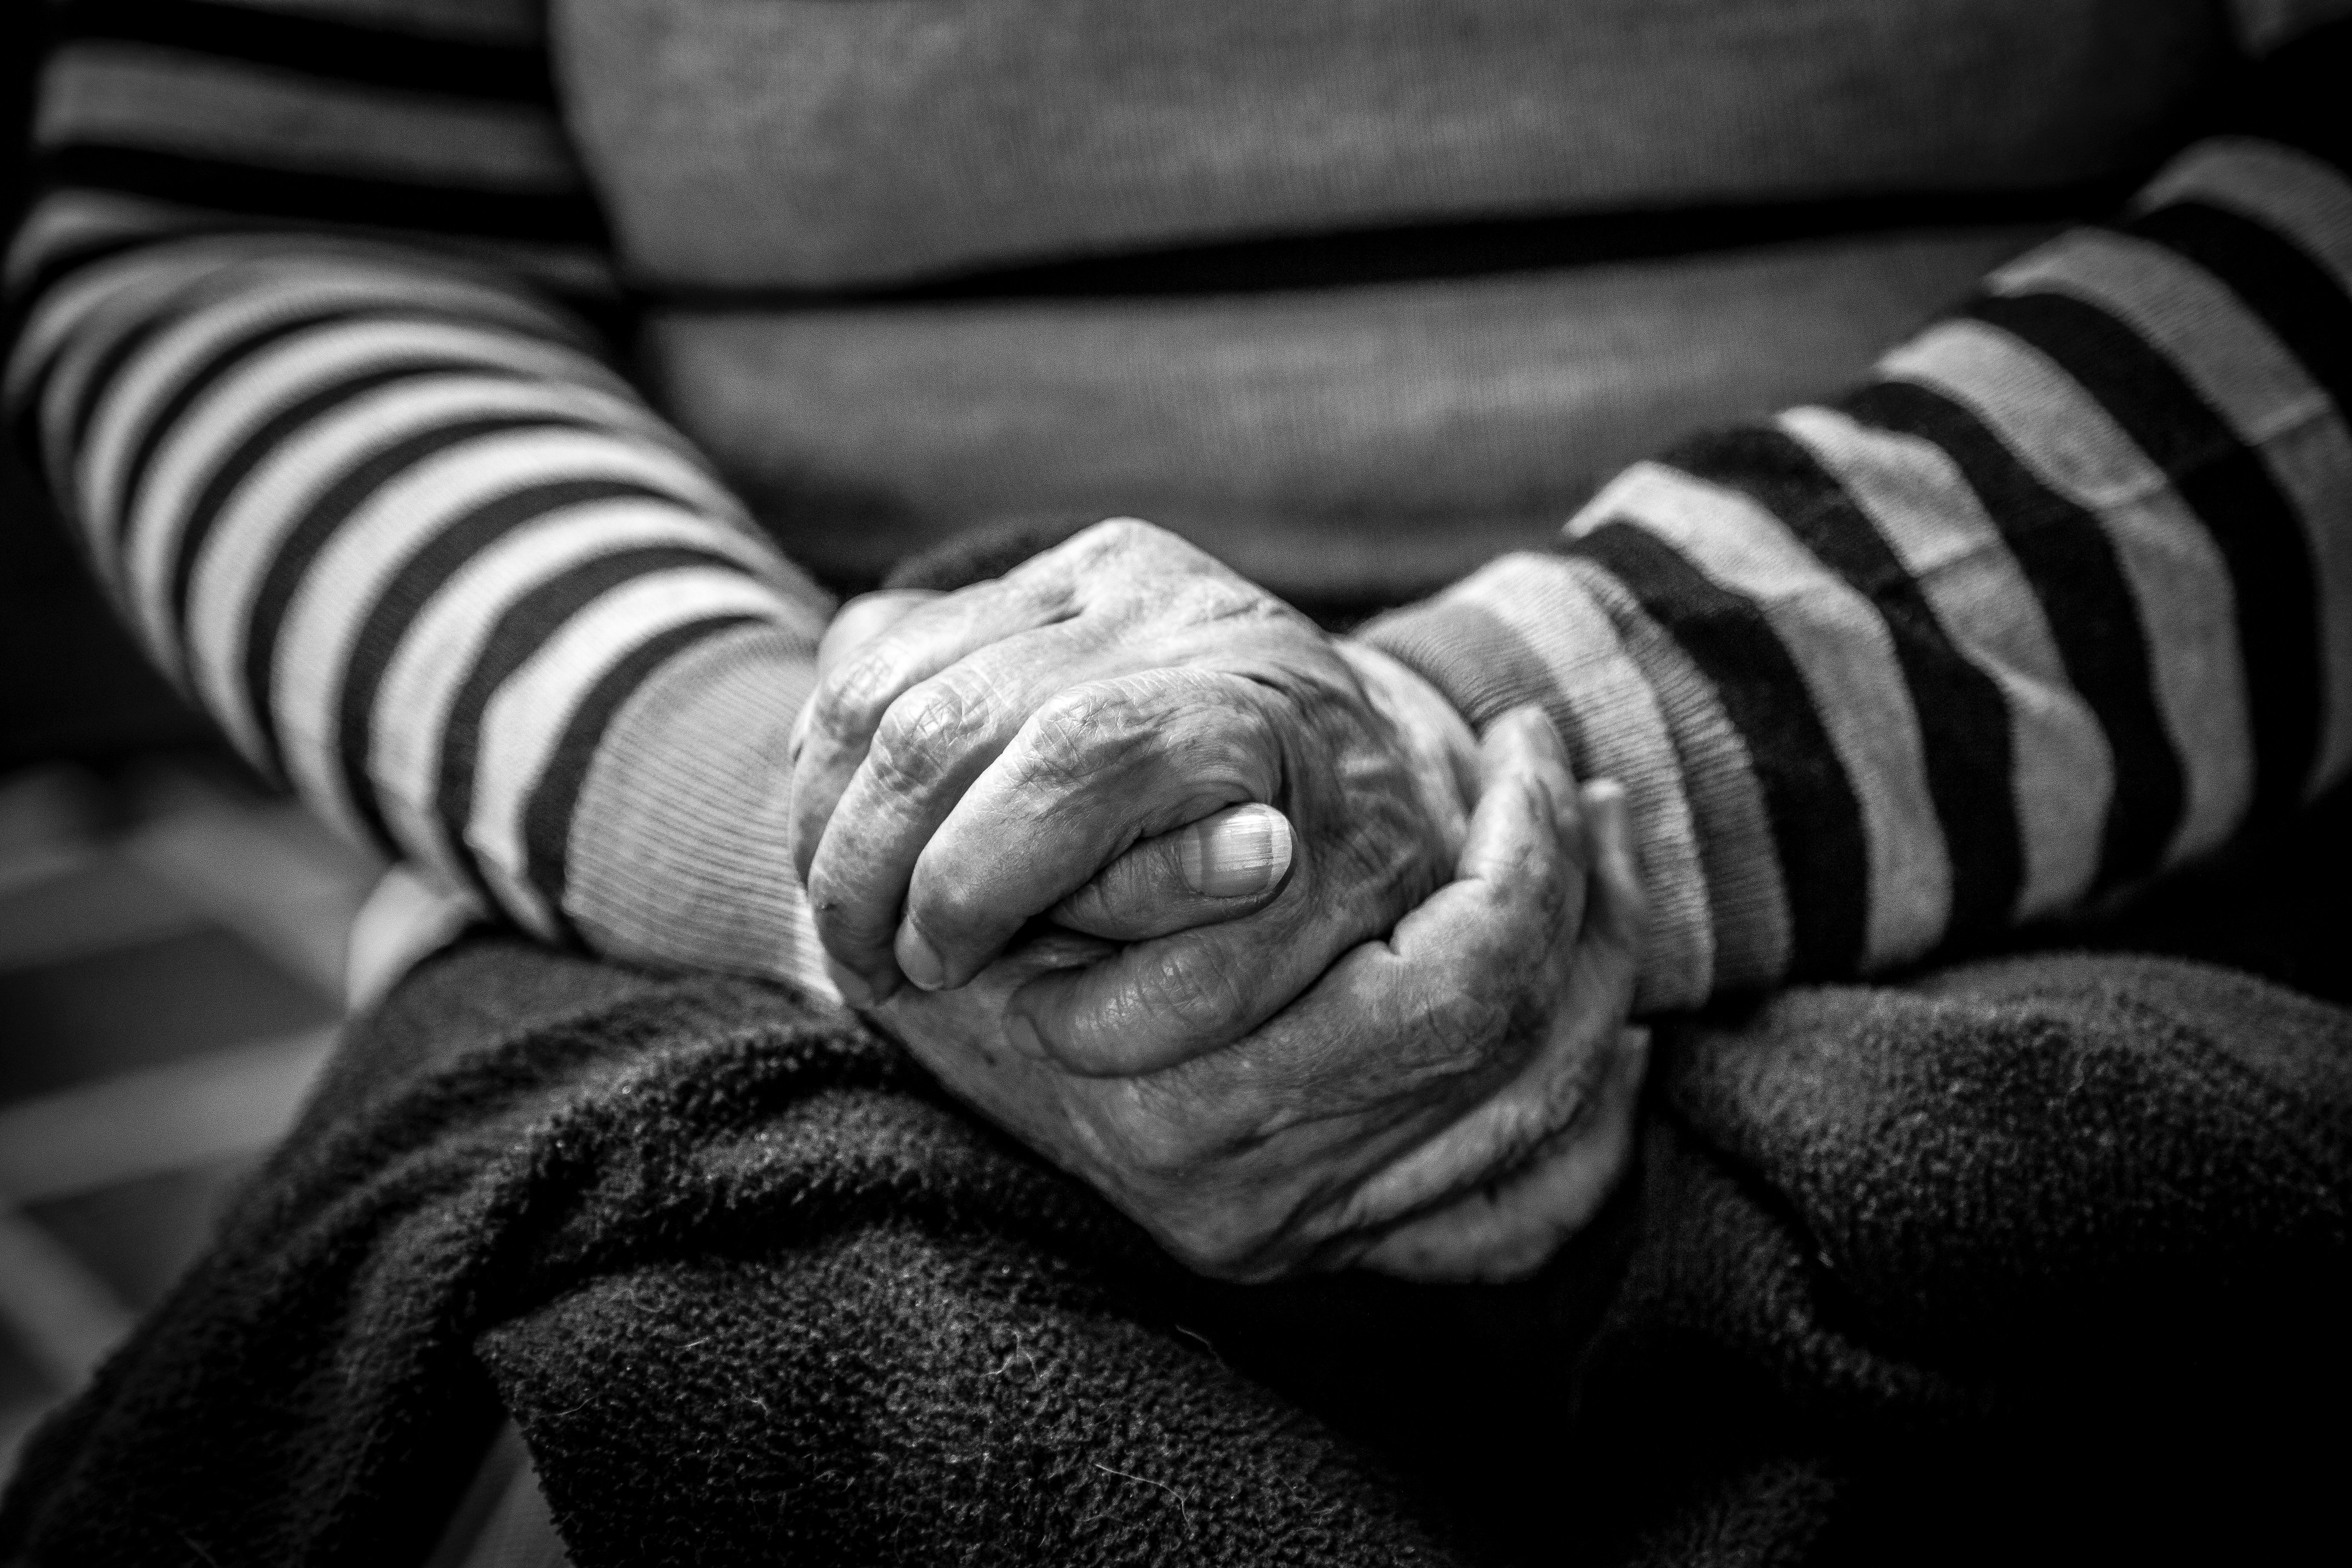 An old lady clasping her hands | Photo by Jorge Lopez on Unsplash